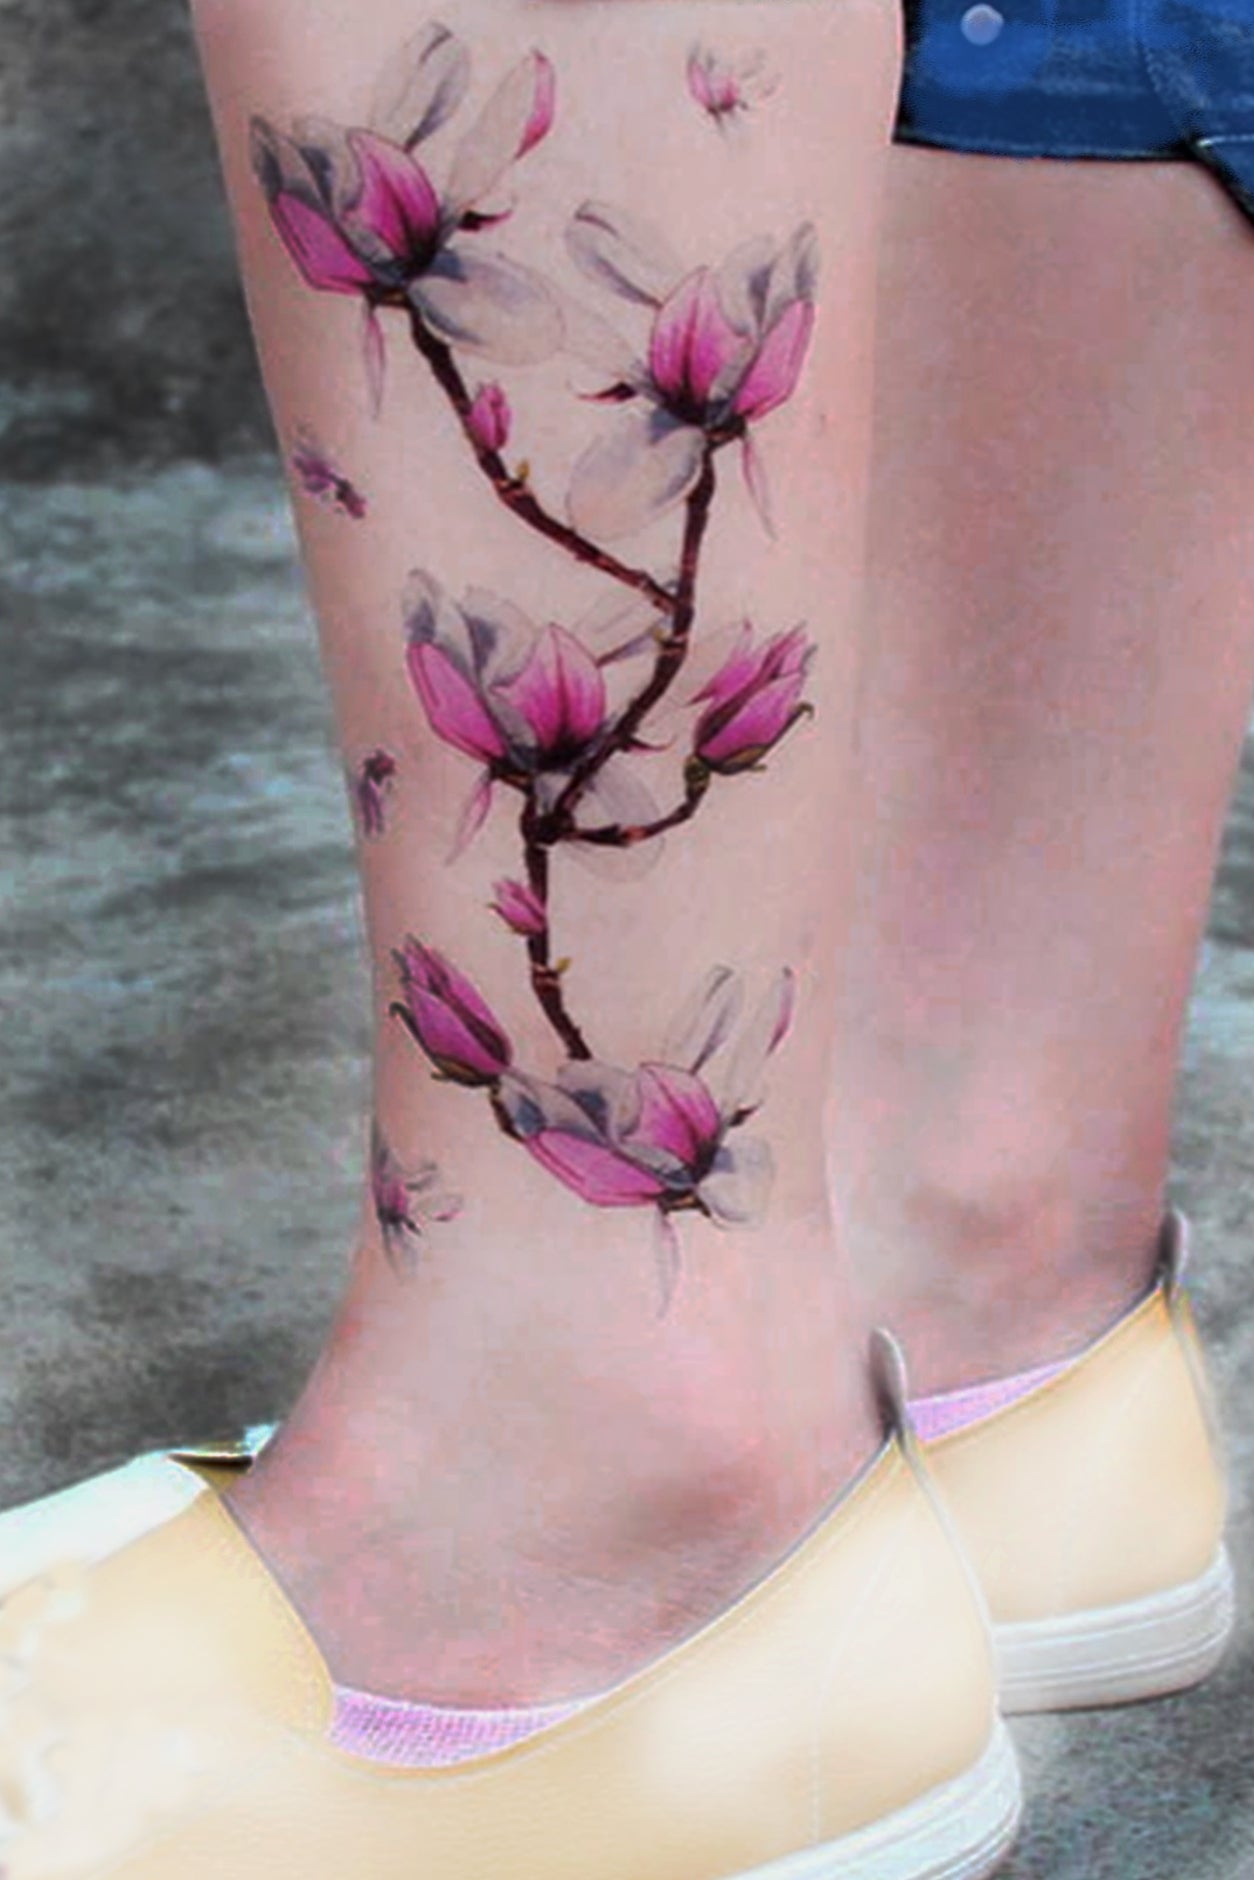 A gender -neutral leg displays the magnolia buds. Wear this tat vertically or horizontally around an arm or ankle. This artistic rendering has small buds that can be placed strategically and separated from the stem. 